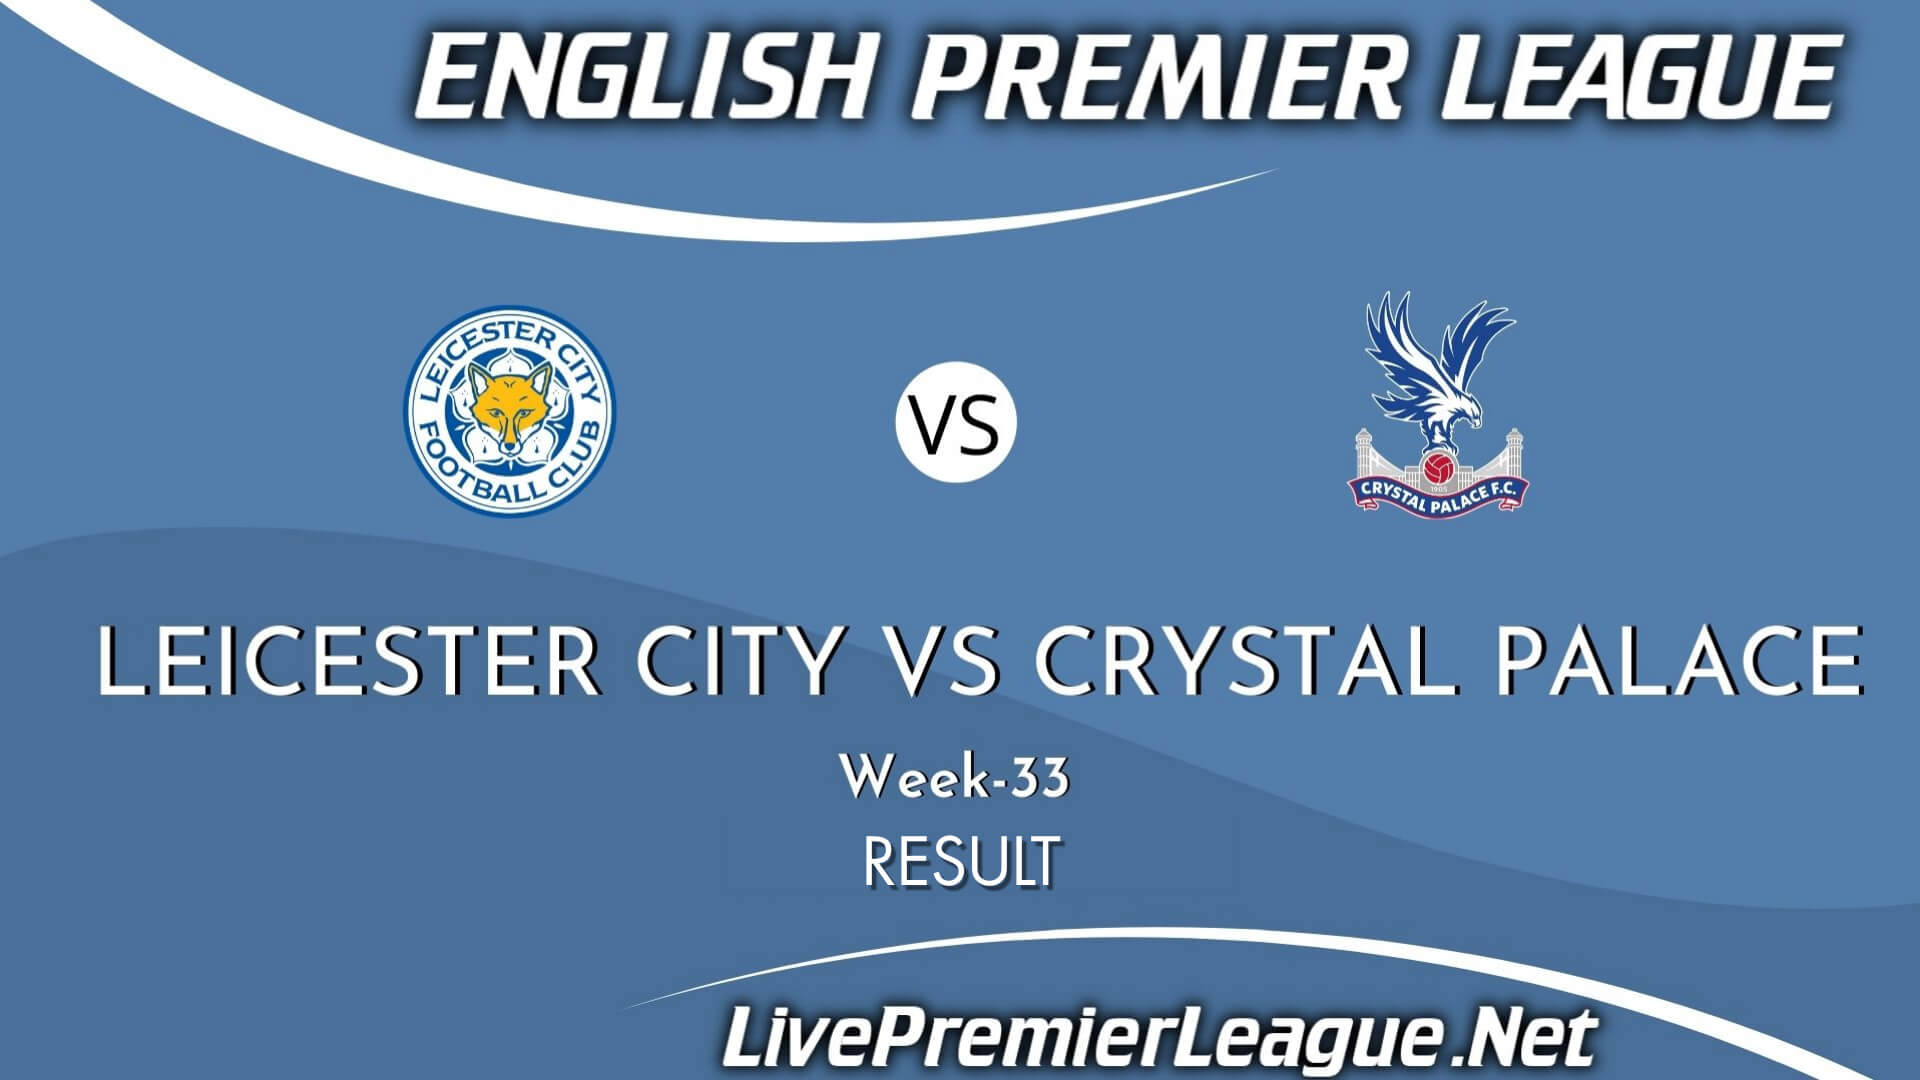 Leicester City Vs Crystal Palace Result 2021 | EPL Week 33